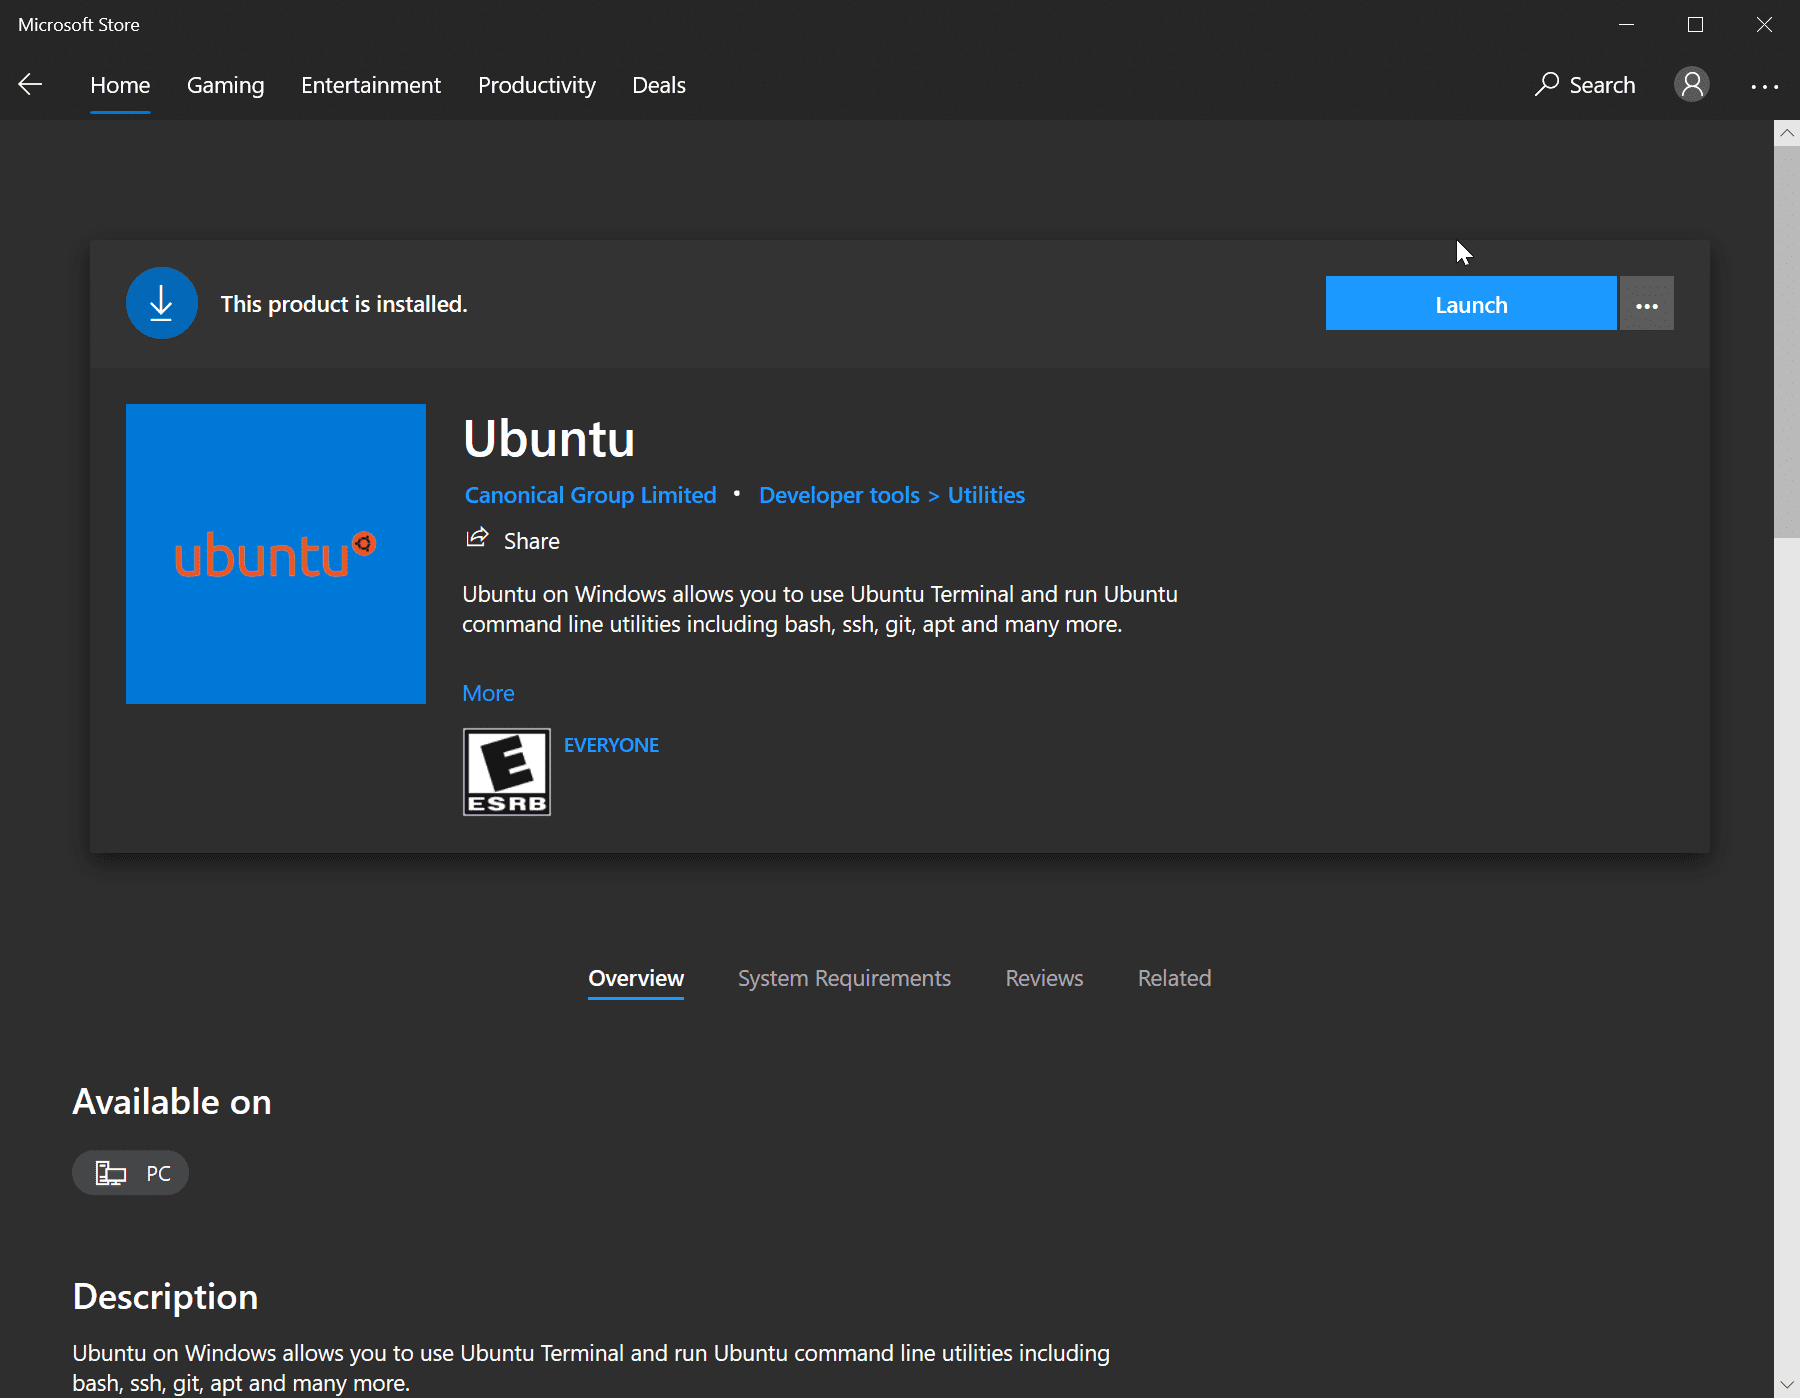 Launch the ubuntu app after installation